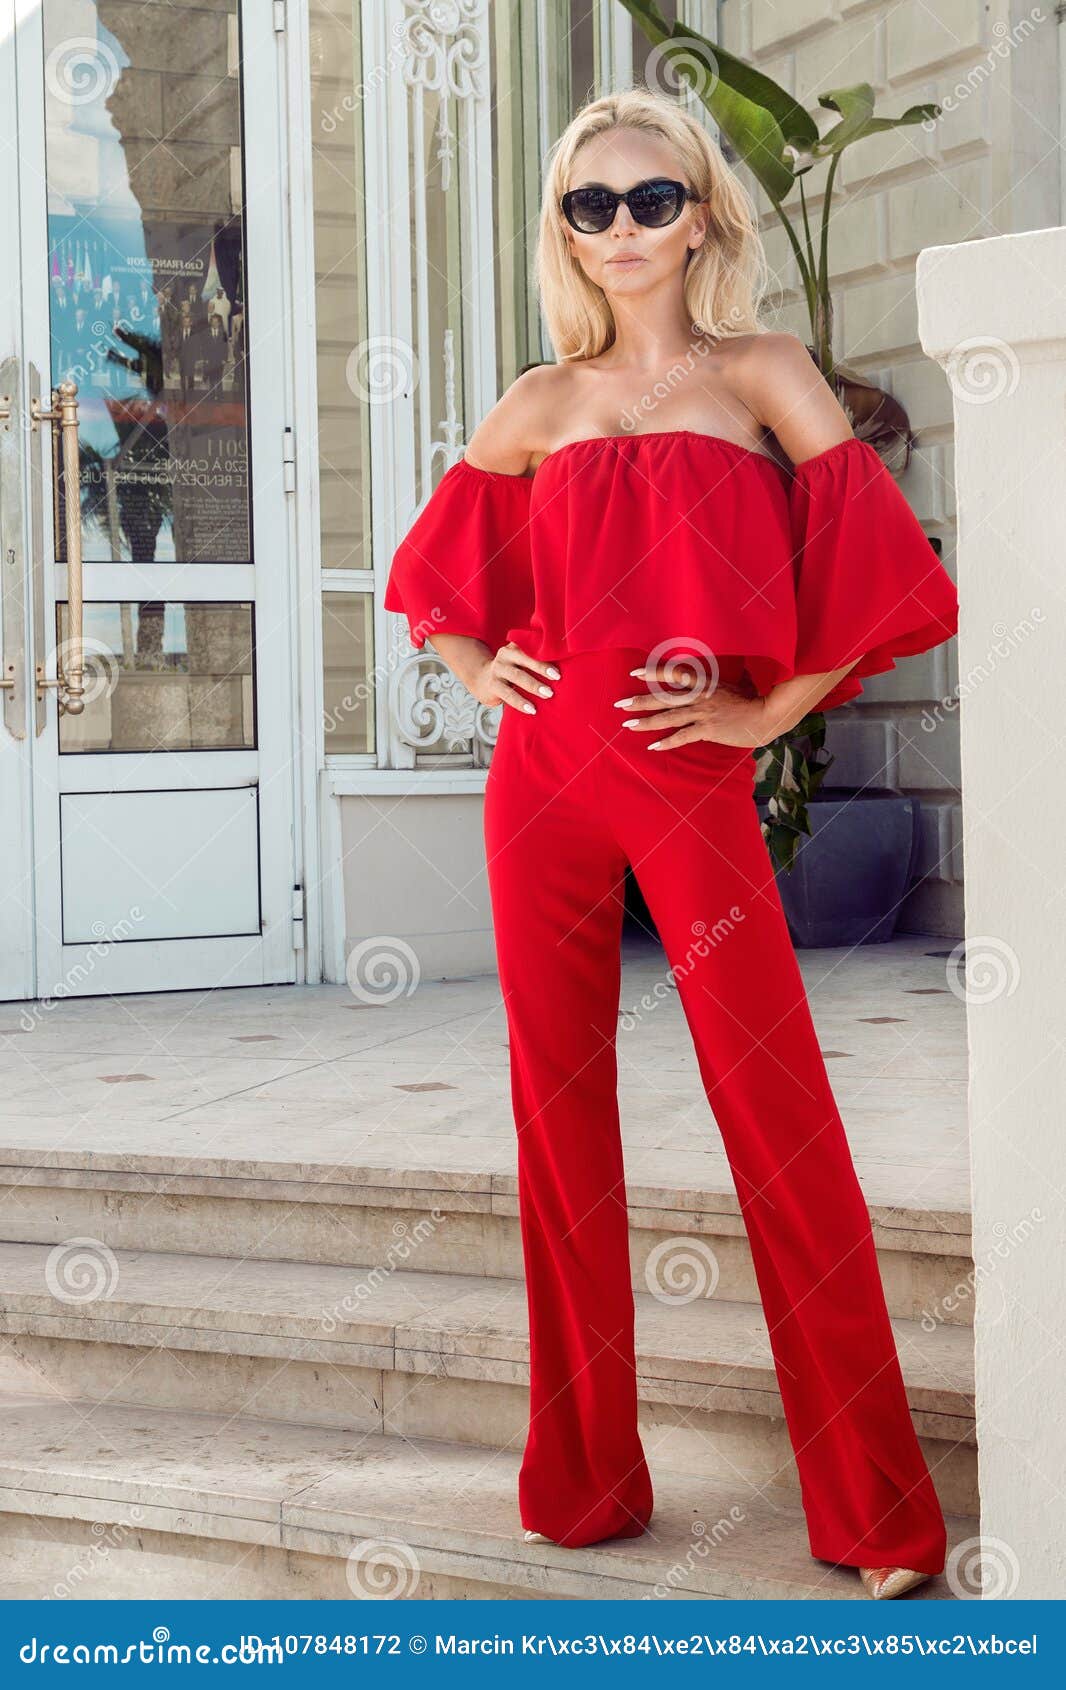 beautiful elegant female fashion model in red dress standing in front of the luxury hotels and boutiques